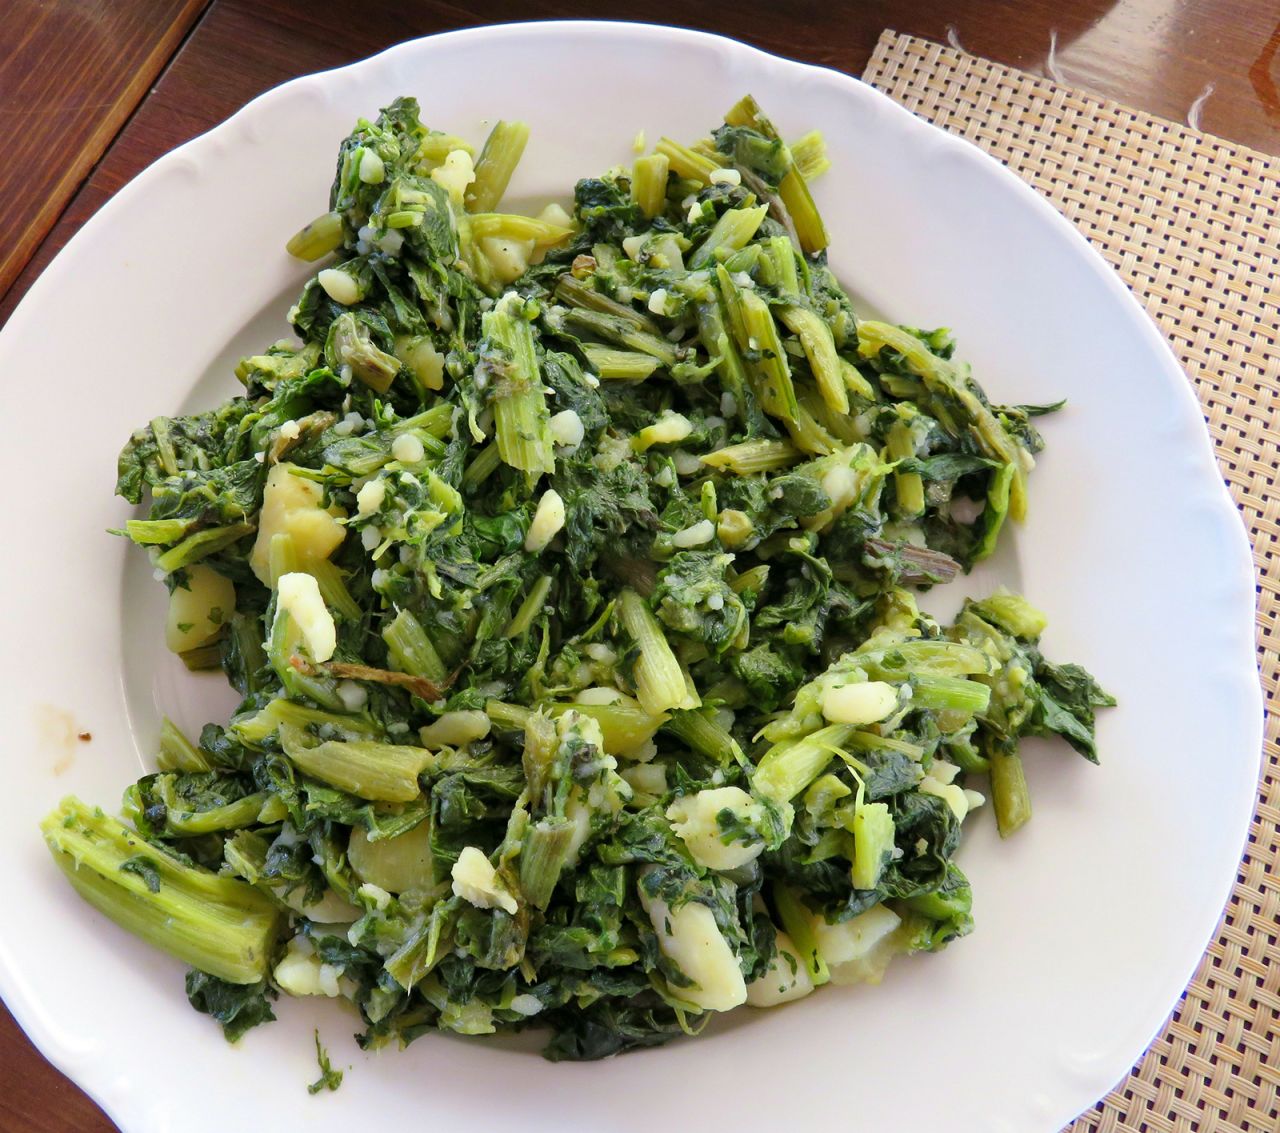 <strong>Blitva, Croatia:</strong> Blitva is a side dish of chard and potato, flavored with olive oil and garlic.